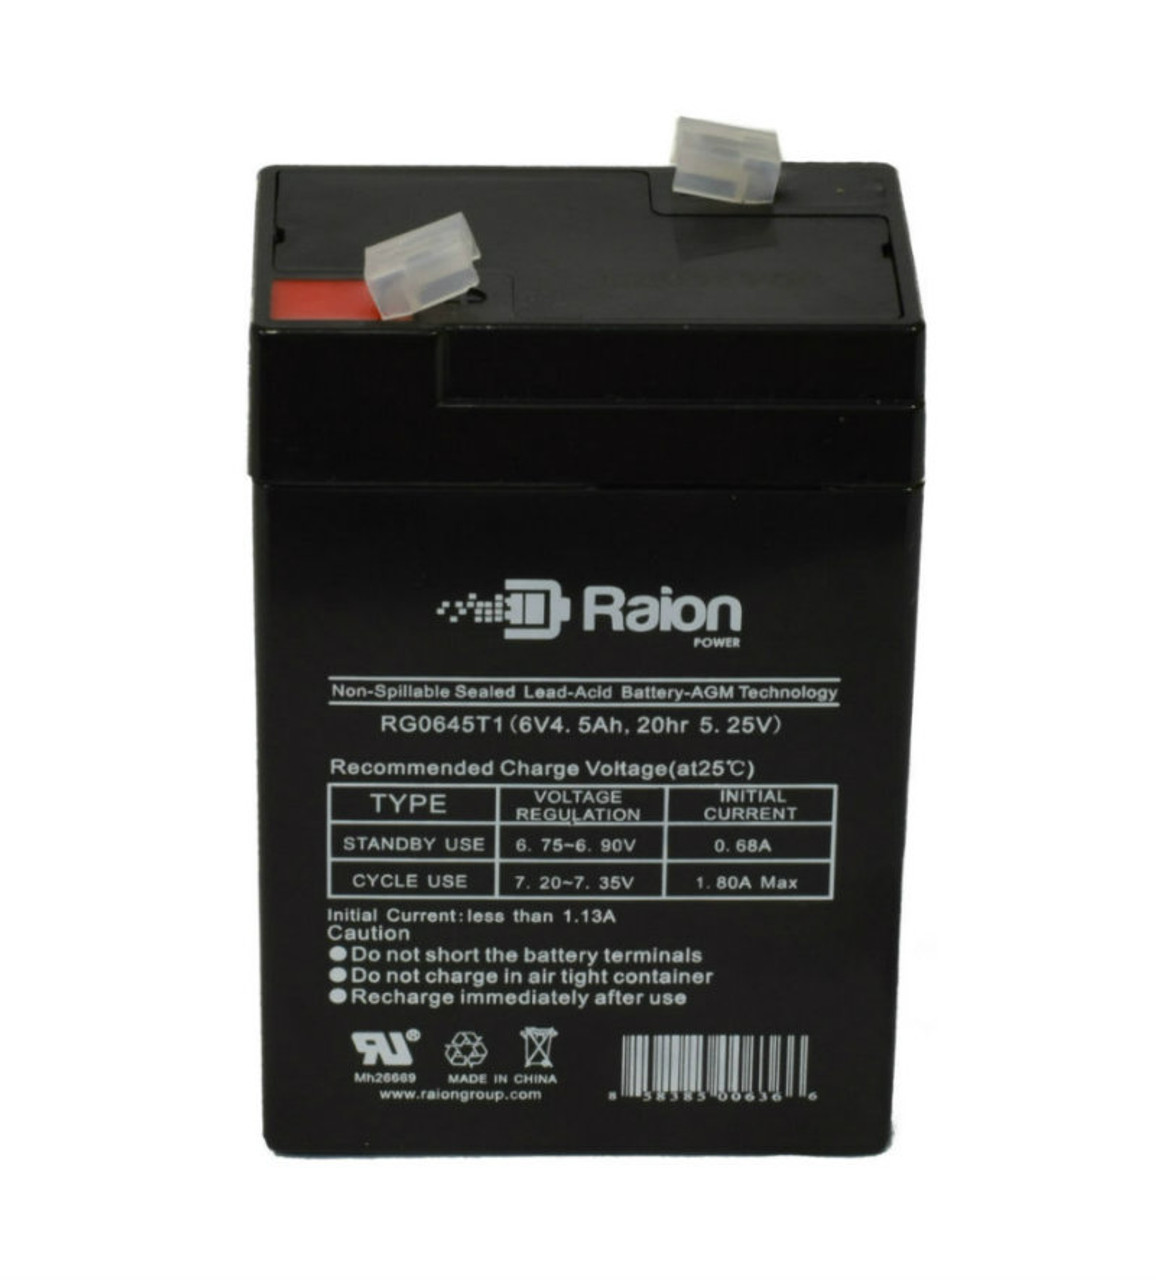 Raion Power RG0645T1 Replacement Battery Cartridge for Aosom 370-038WT 12V Kids Jeep Ride On Car